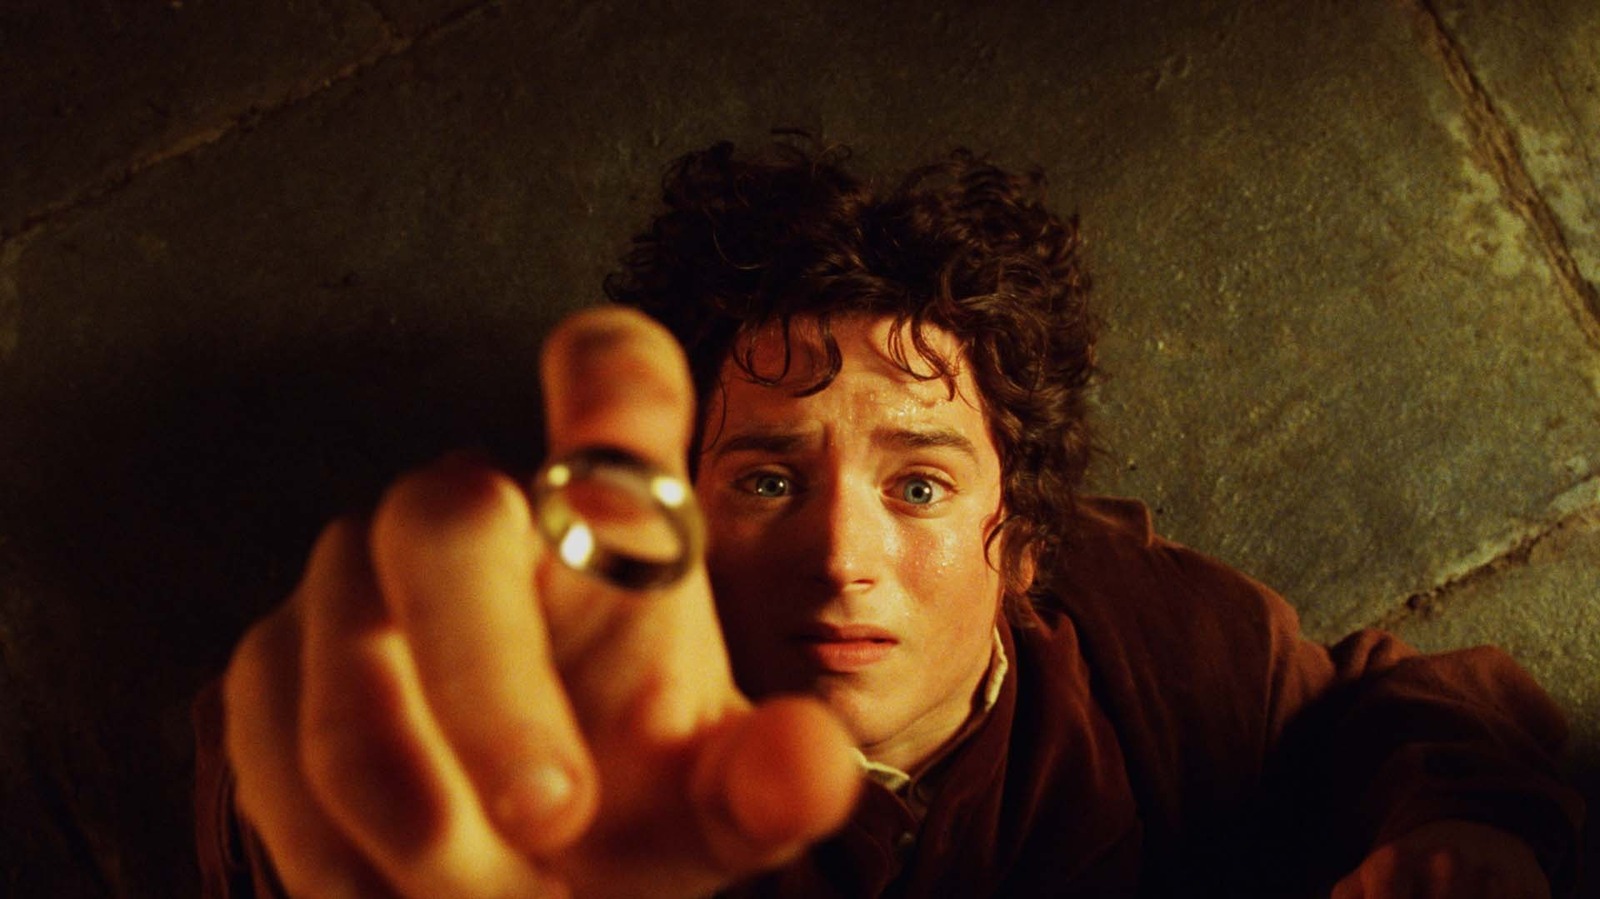 Lord of the Rings Movie and Game Rights Up for Sale for Expected $2 Billion